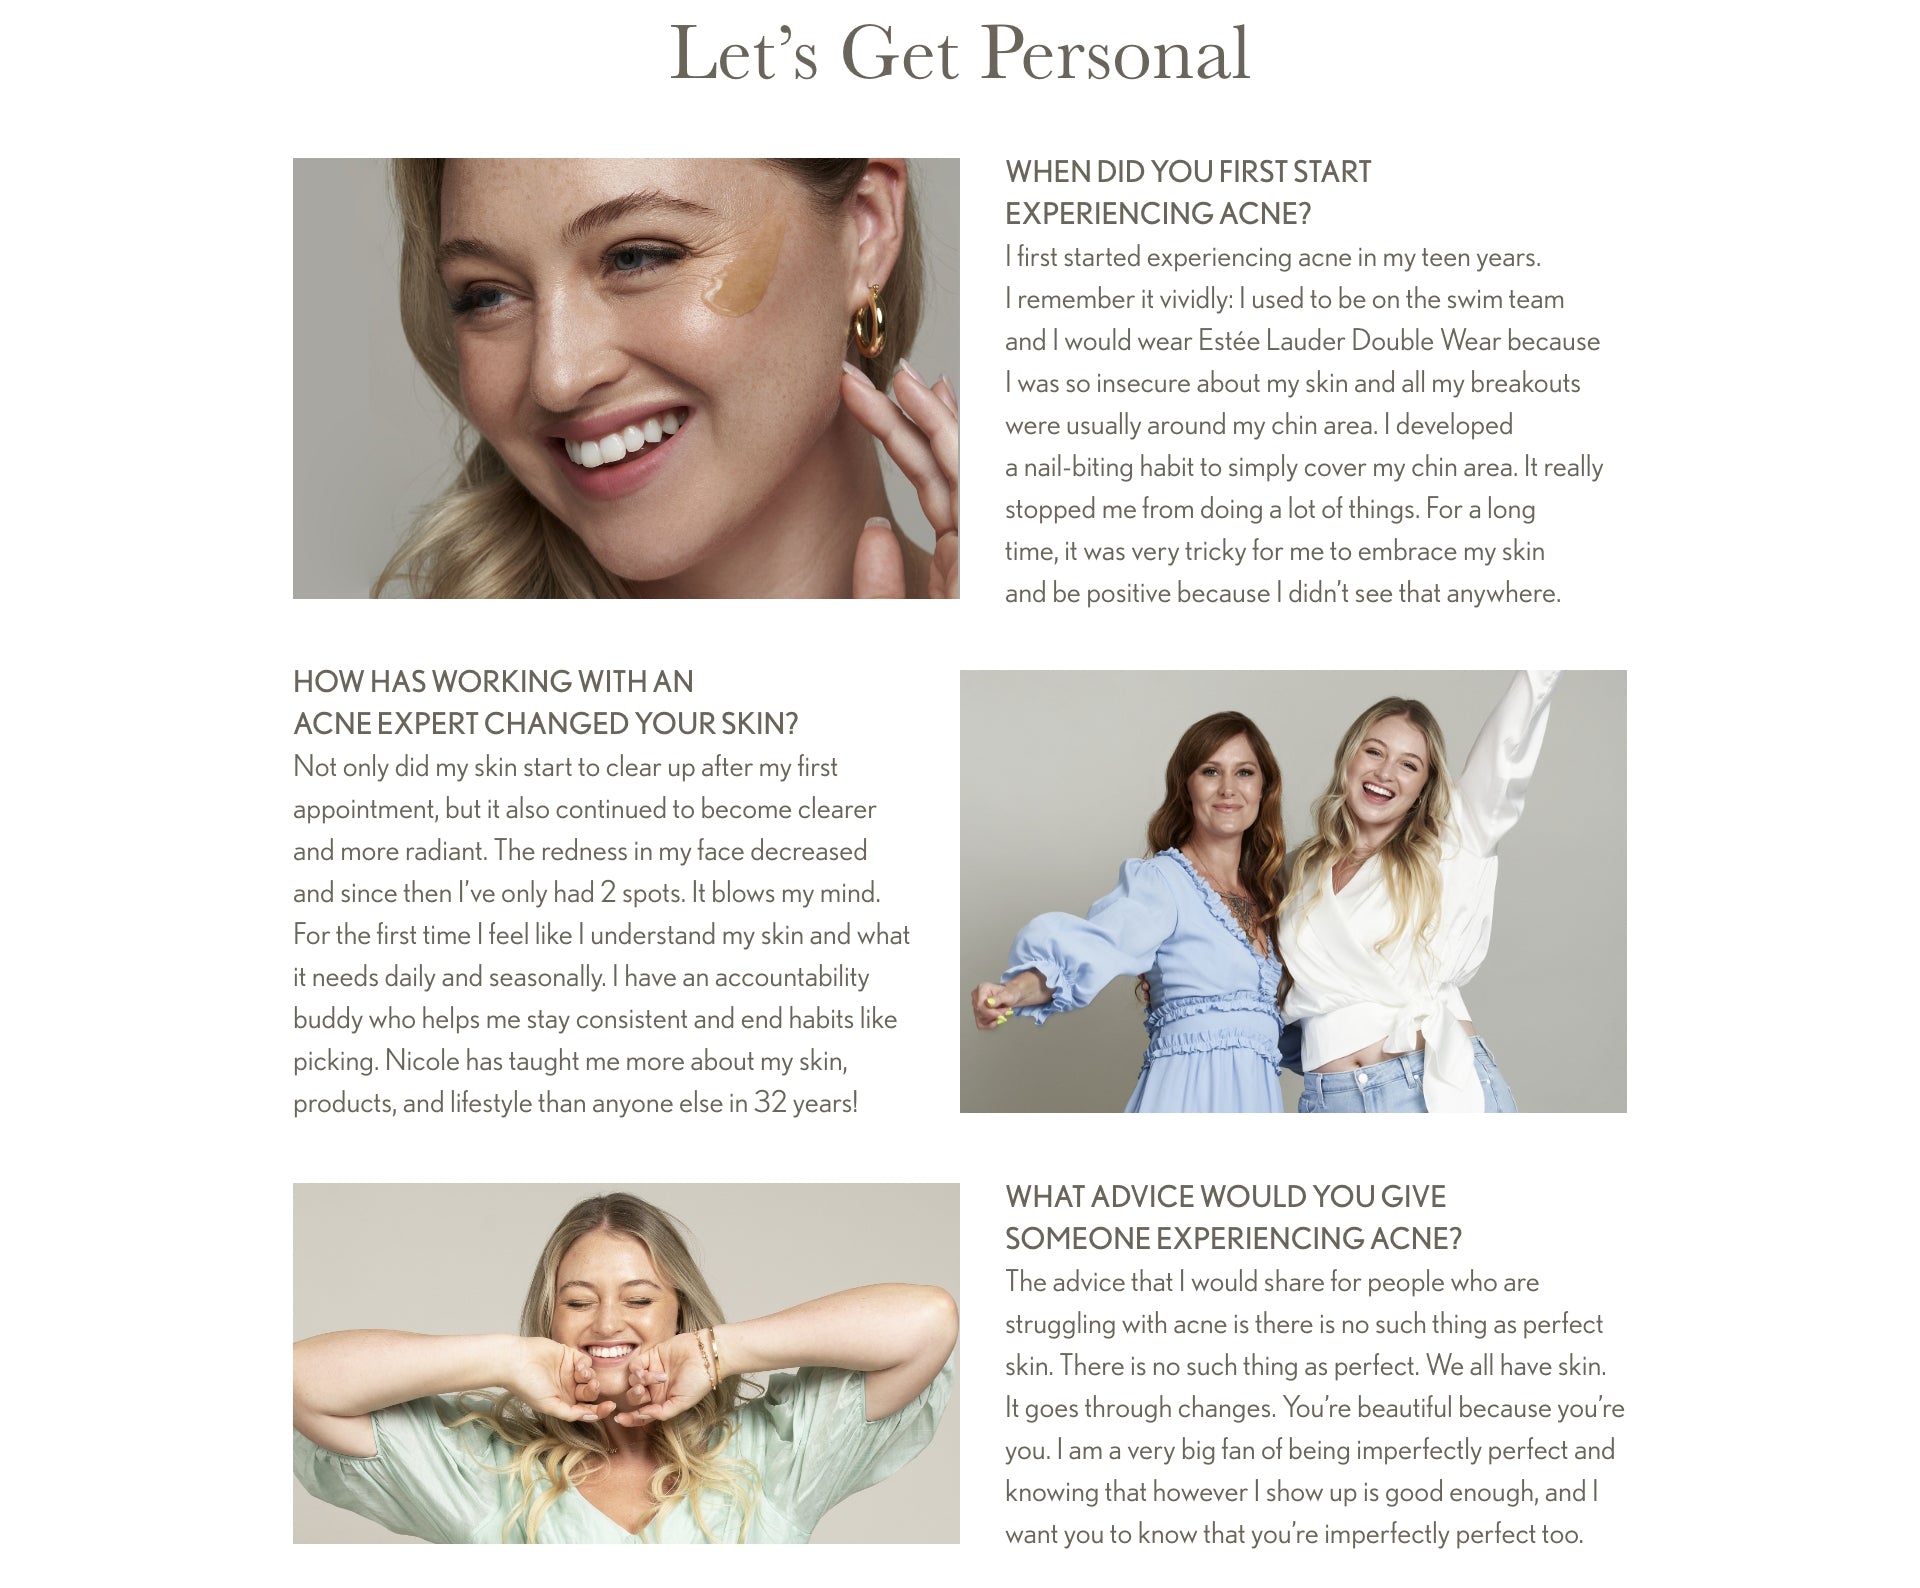 A section titled Let's Get Personal with information about Iskra's acne journey, including her teenage adolescent acne, how her skin cleared with Face Reality, and how she has only had 2 spots since getting clear. 3 photos of Iskra, 1 with her Acne Expert